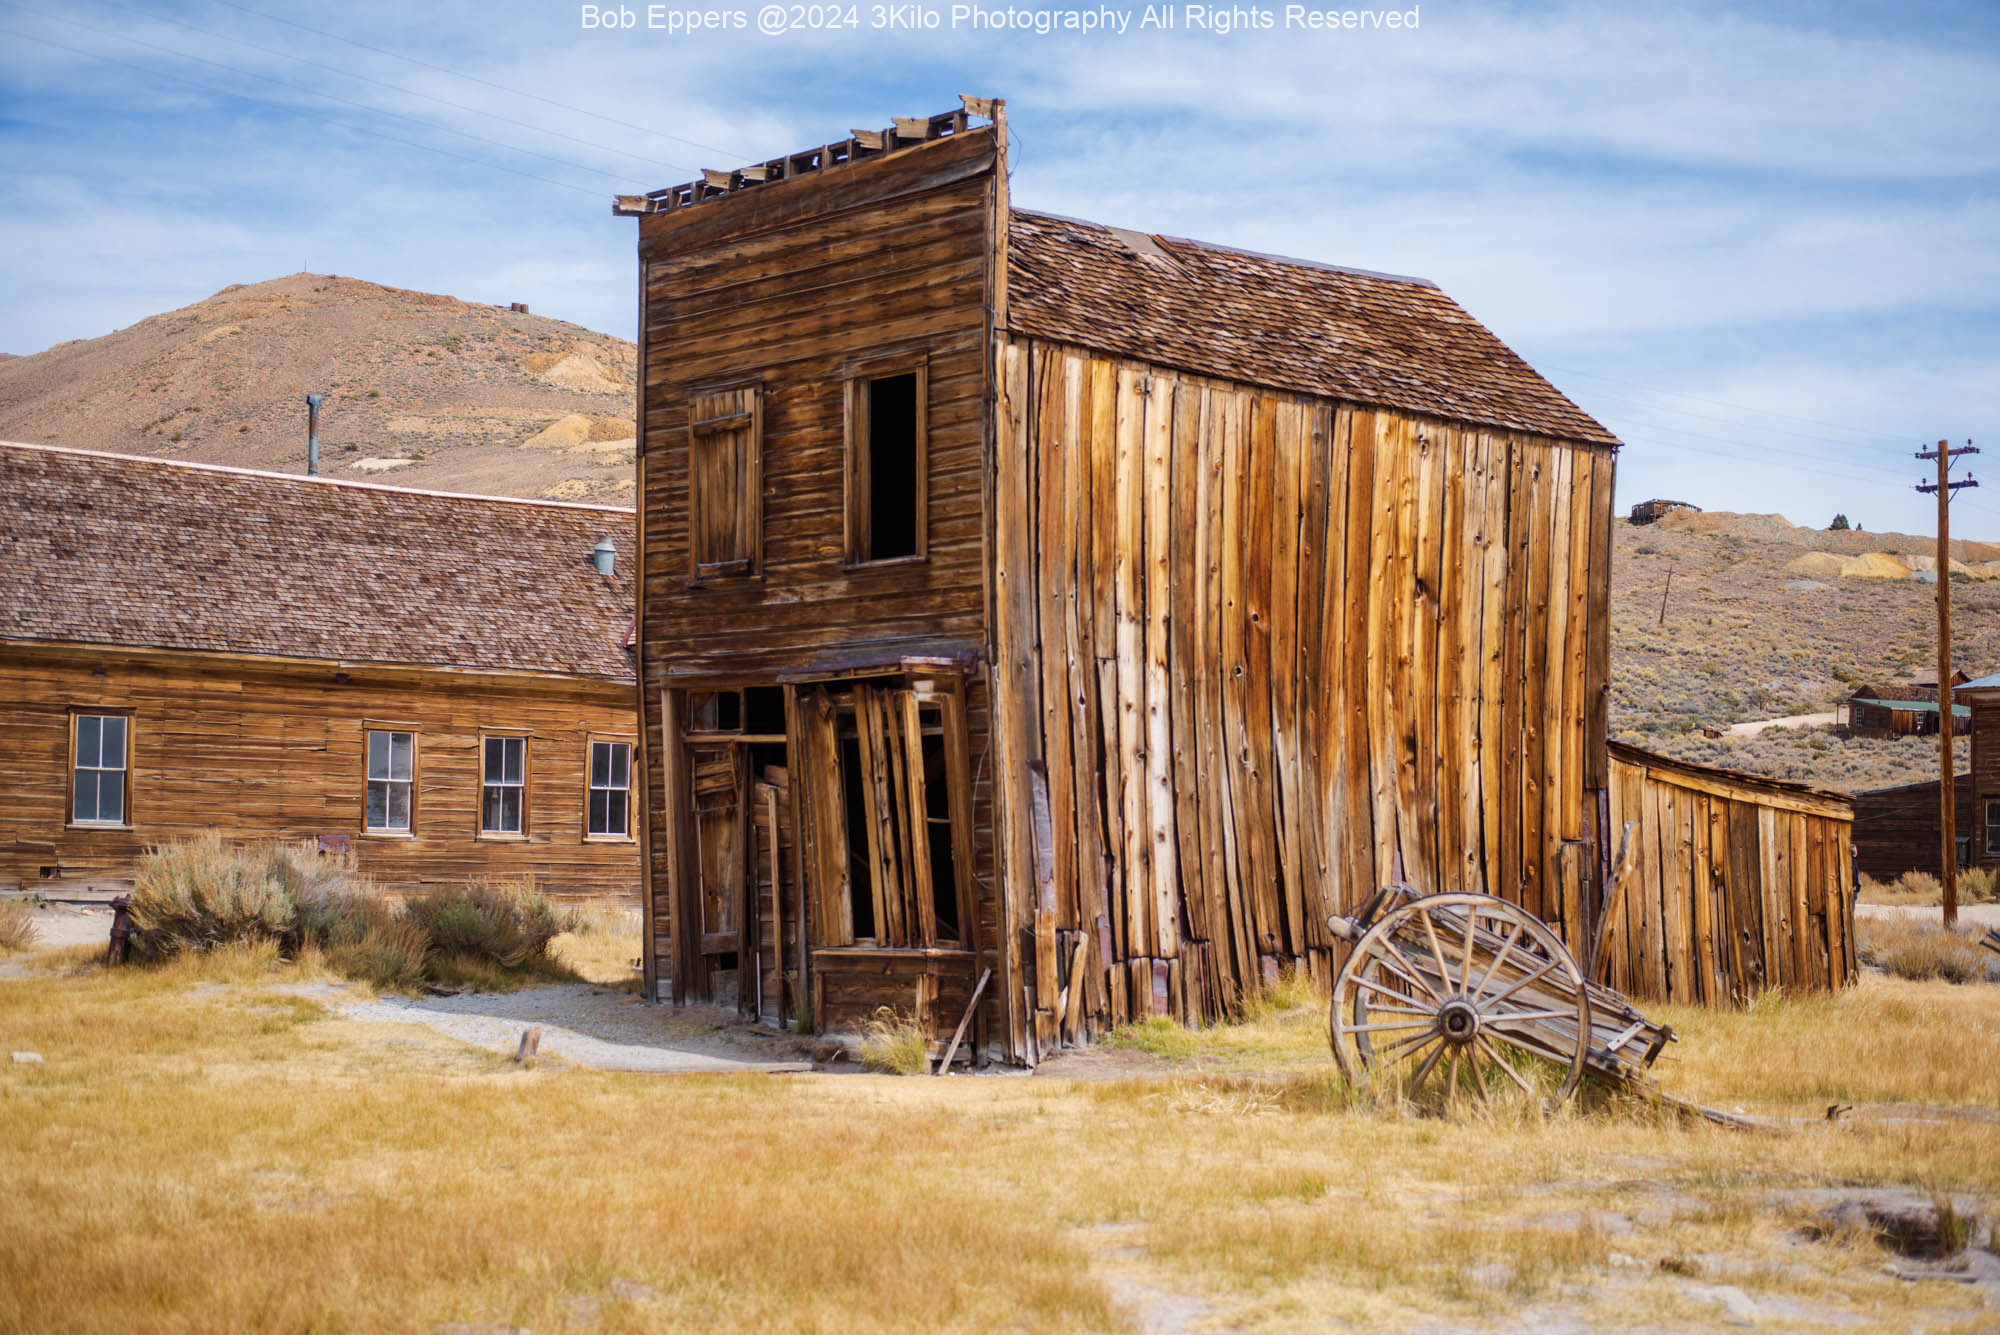 Photo of the Ready to Collapse Building in Bodie, CA